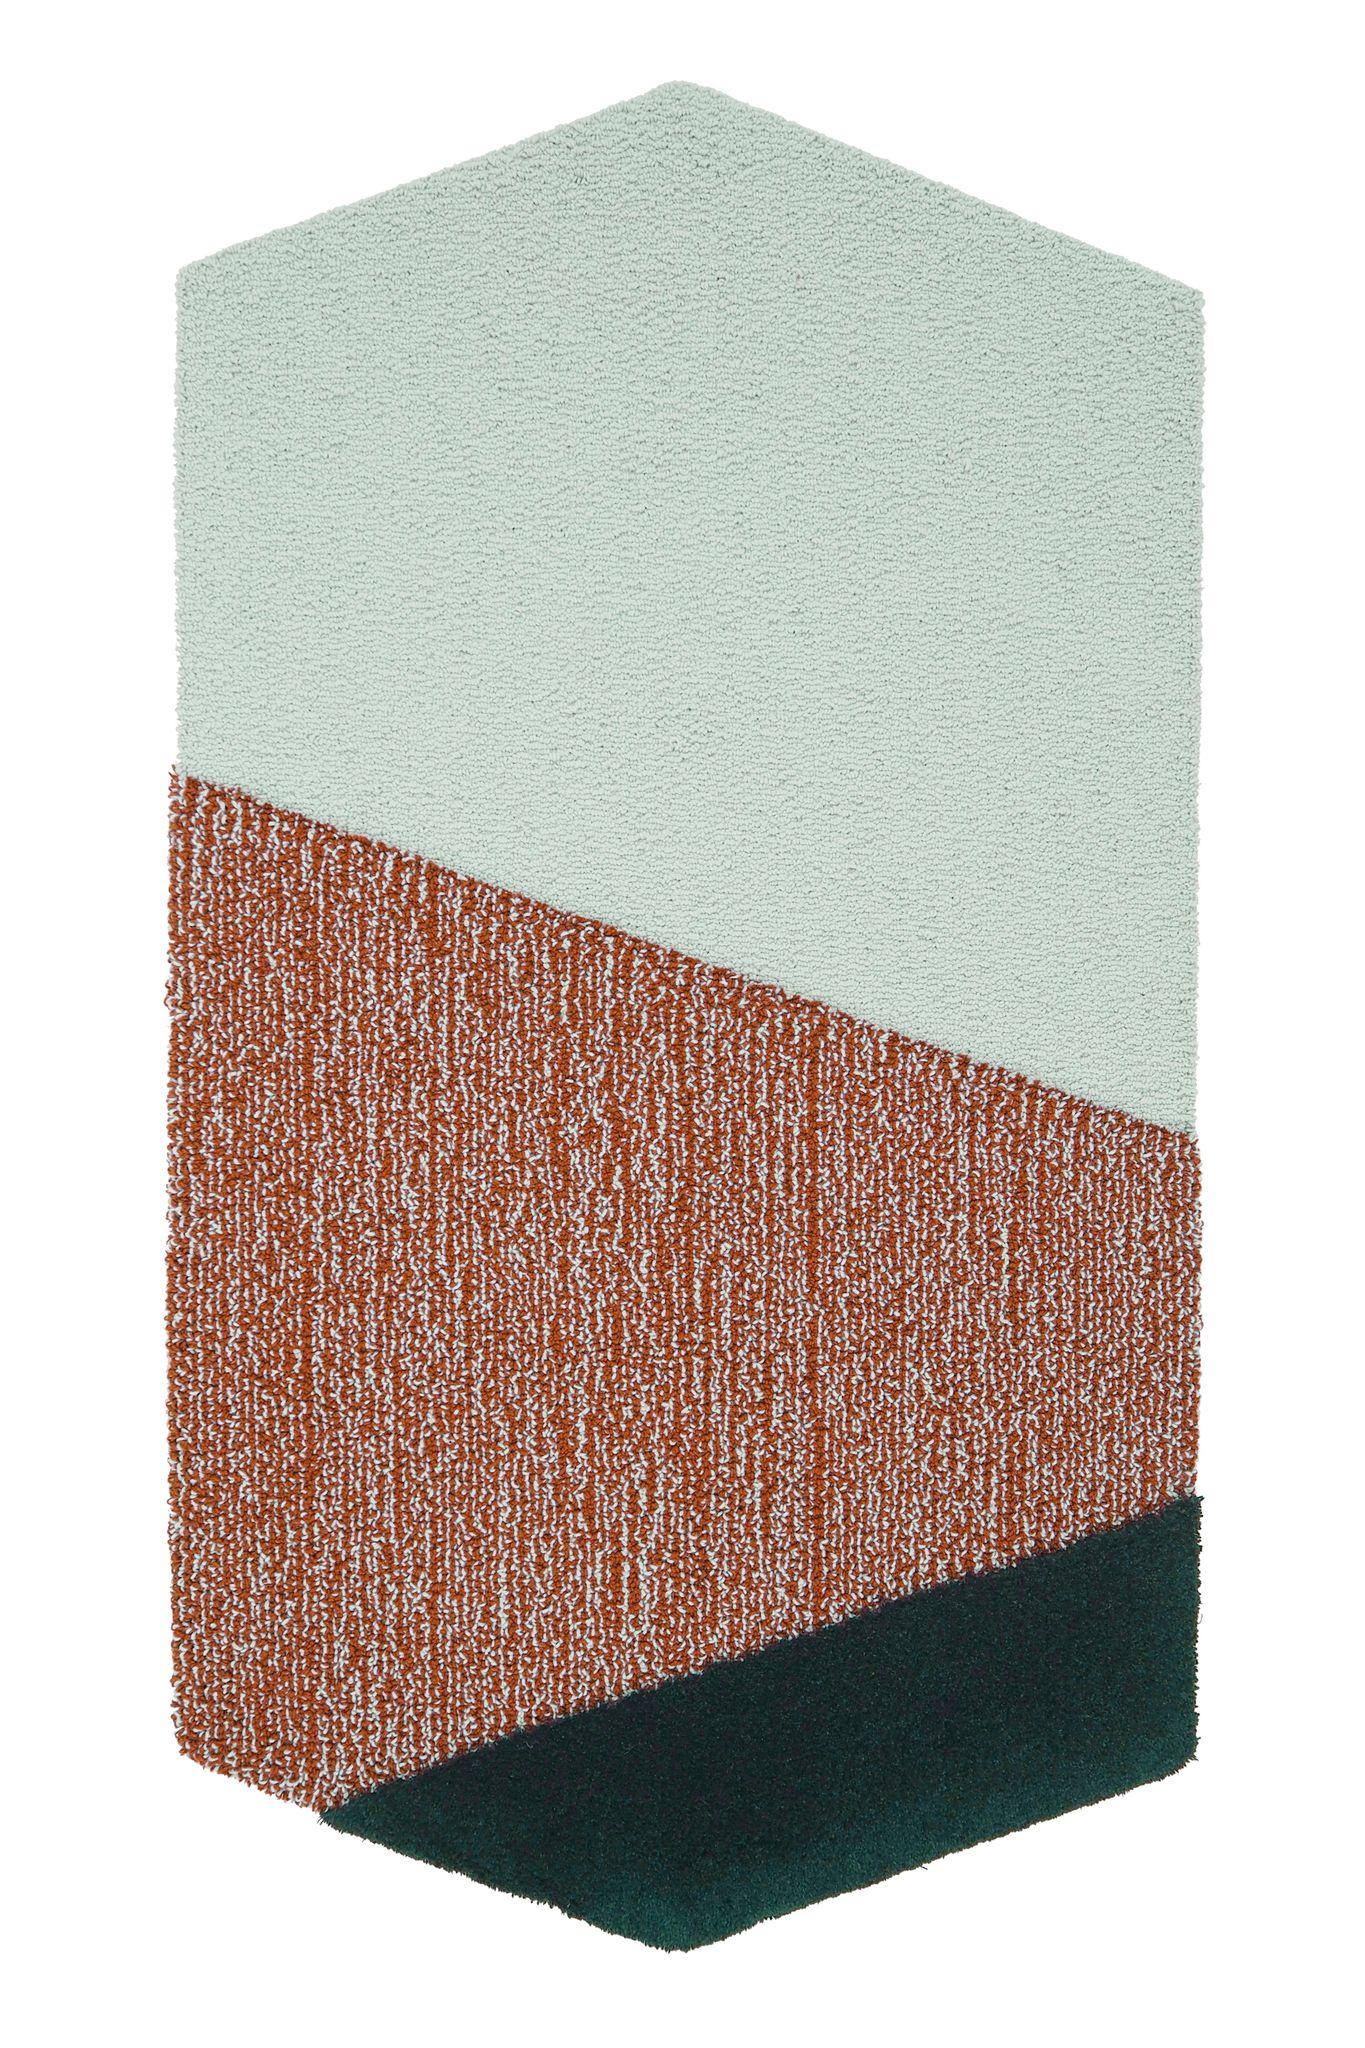 Composition of 3 100% New Zealand wool rugs
Designed by Seraina Lareida 
Made in Italy

Oci Triptych is a composition of three rugs that combined together it makes a single design easily adaptable to any type of space.
Walking on, you can feel